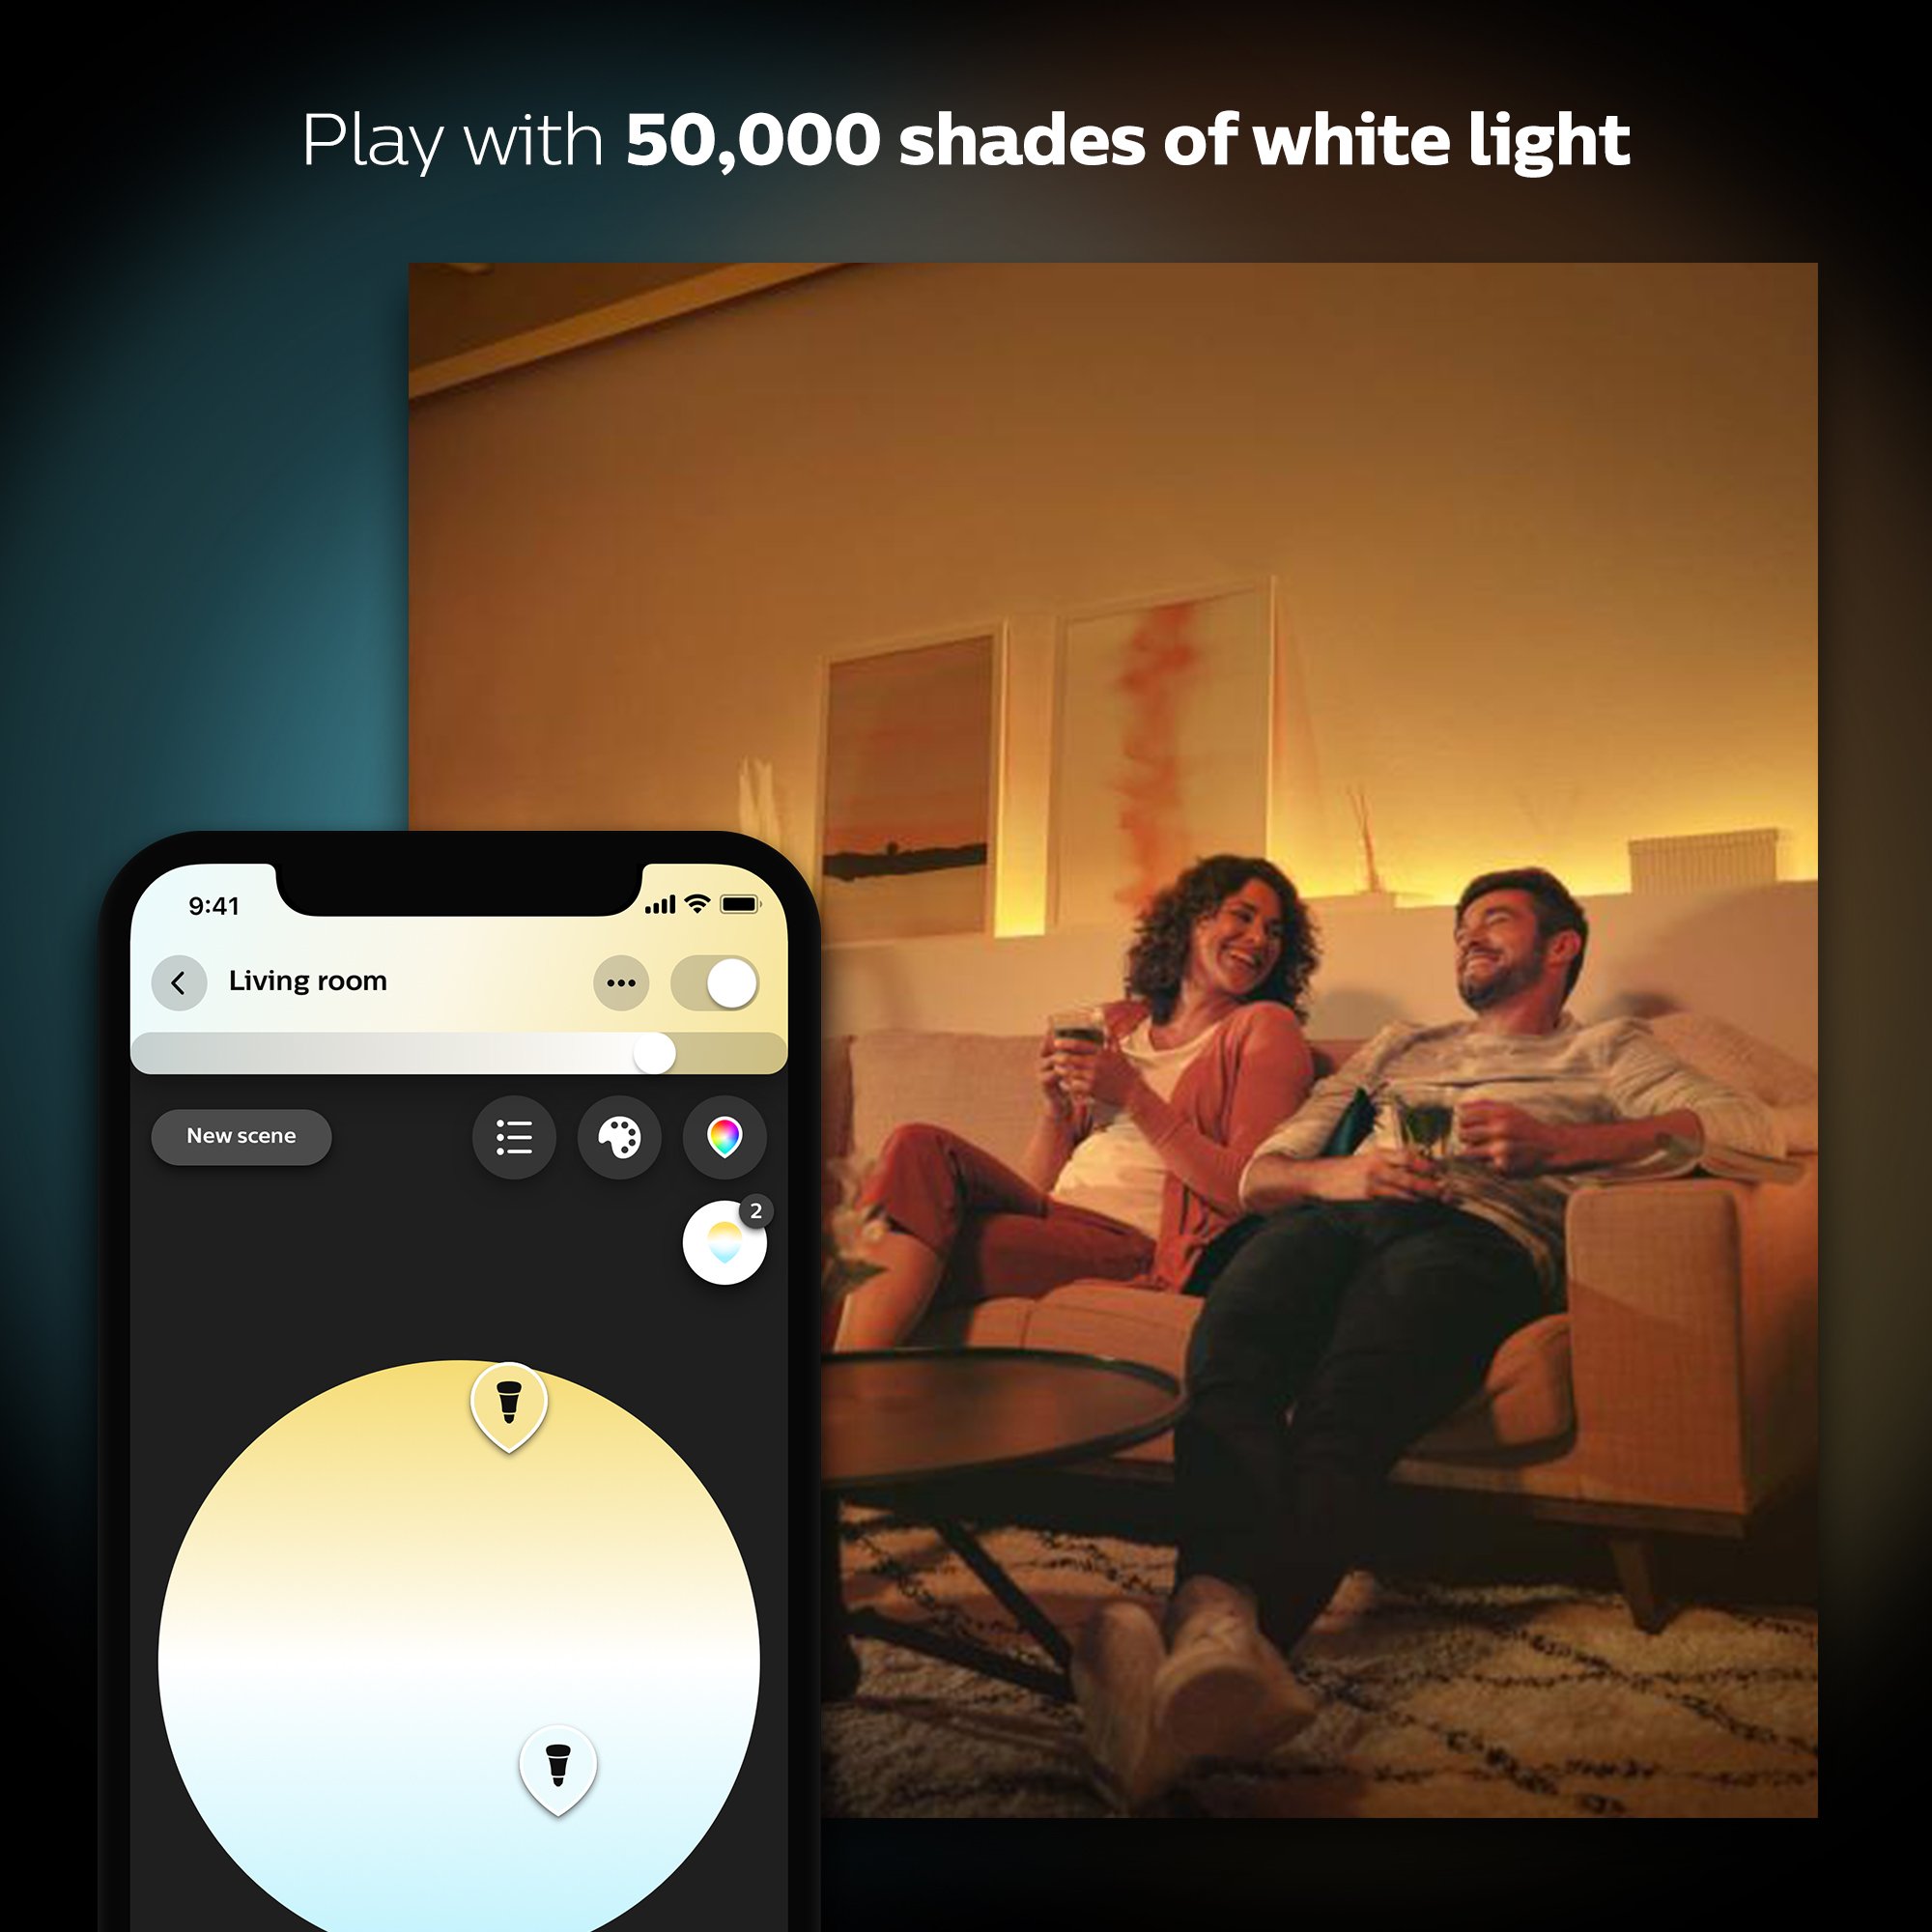 Philips Hue White Ambiance BR30 LED Smart Bulbs (Bluetooth Compatible), Compatible with Alexa, Google Assistant, and Apple HomeKit, 2-Pack